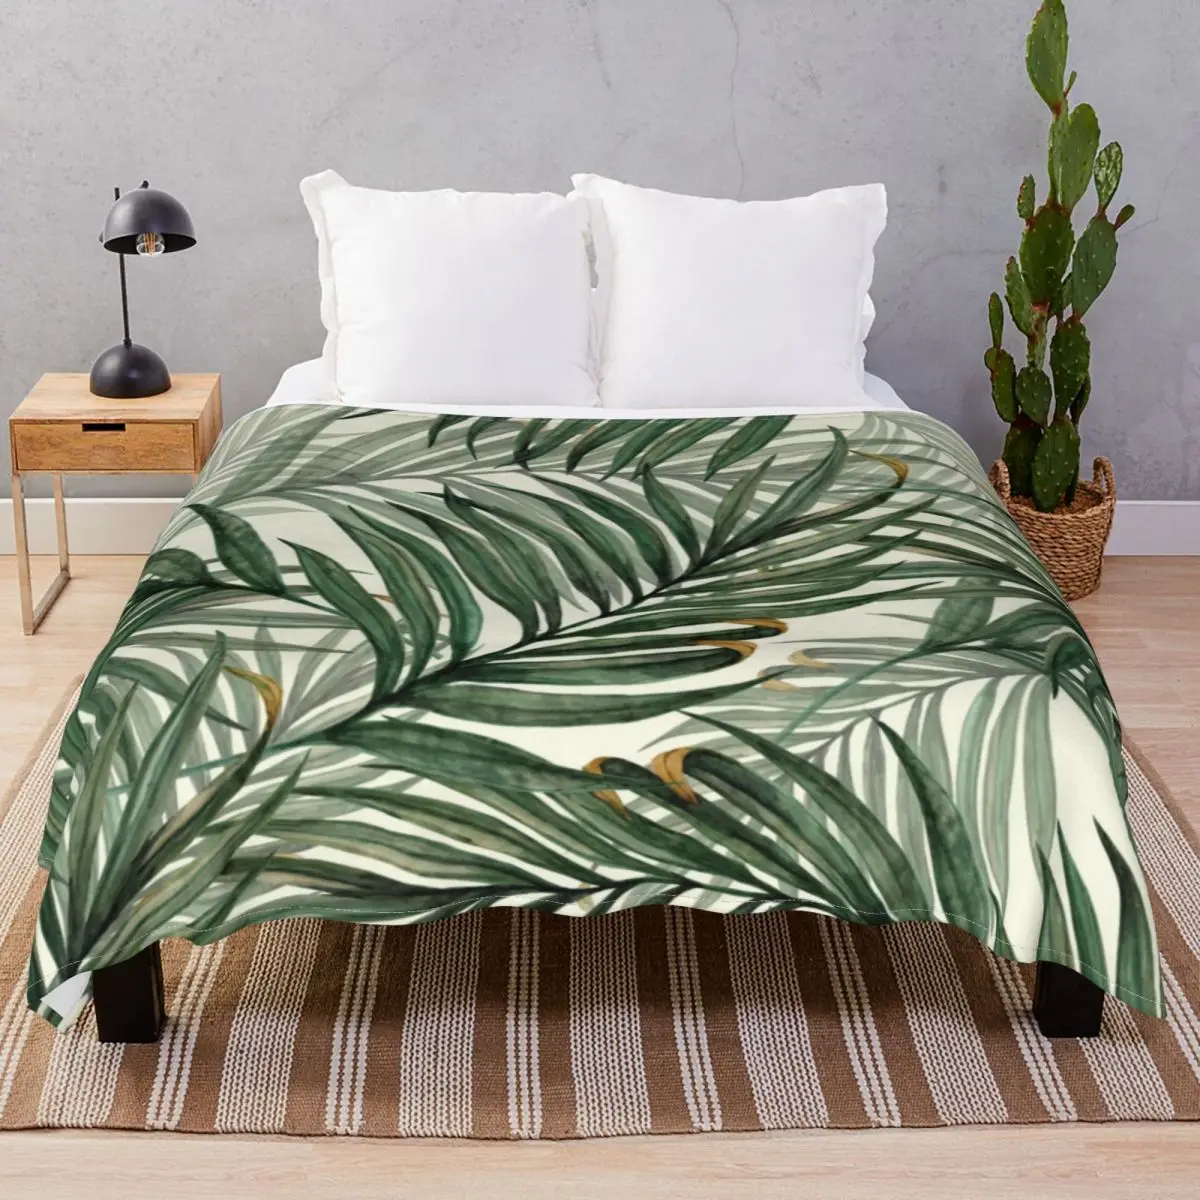 Palm Leaves Blanket Fleece Printed Super Soft Throw Blankets for Bed Home Couch Travel Office